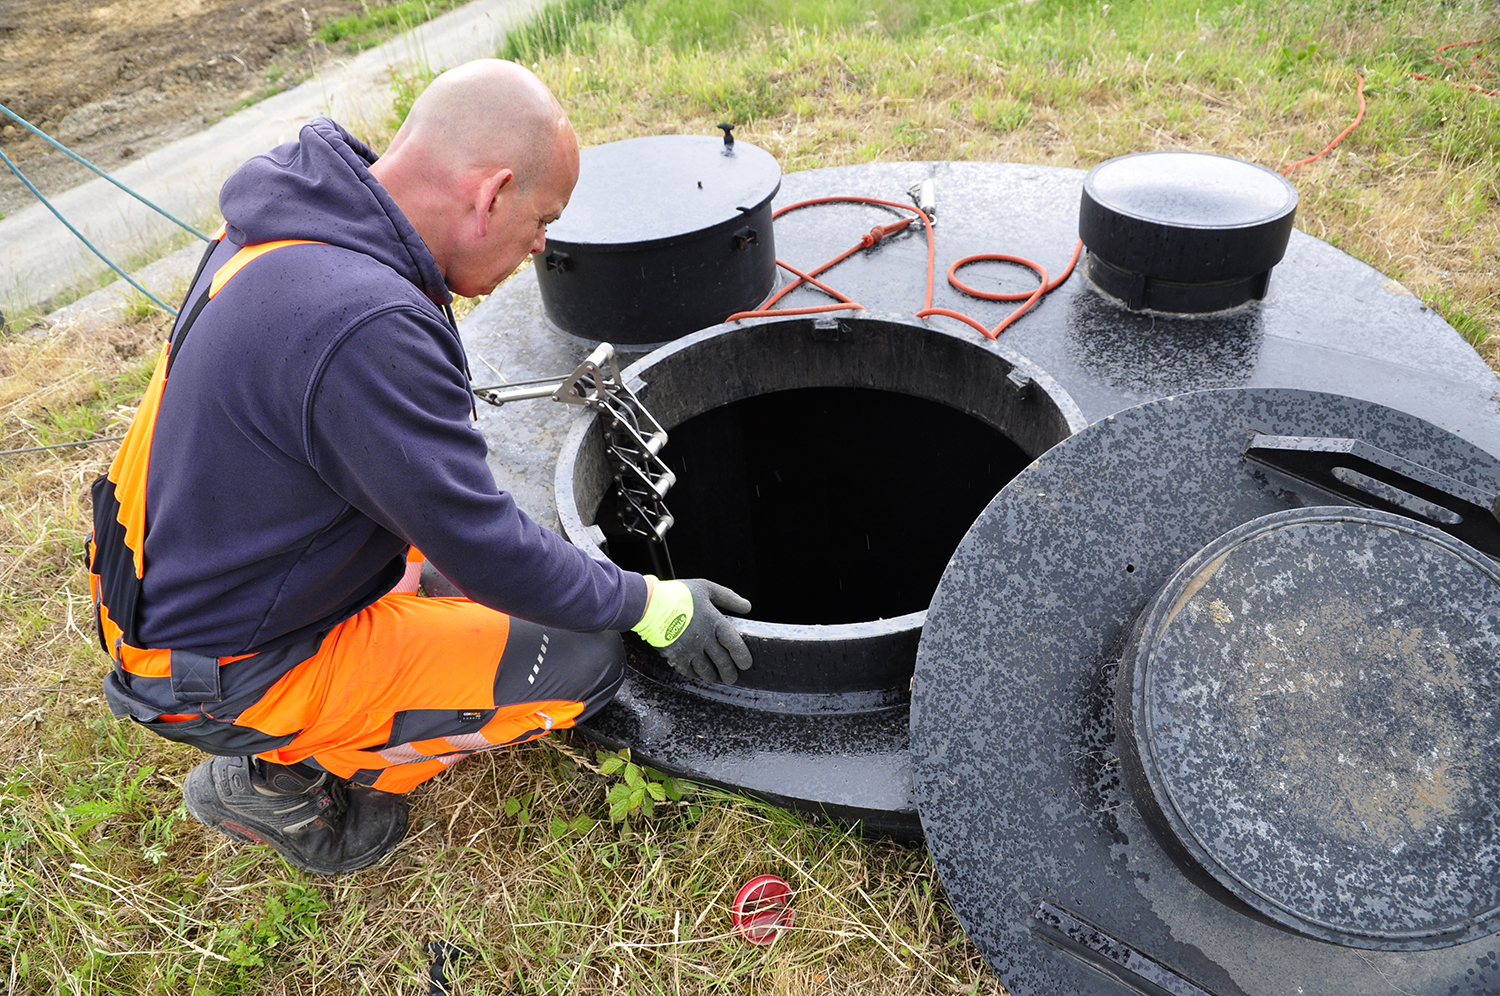 PRESS RELEASE – Esders expands service portfolio to include trenchless pipe rehabilitation